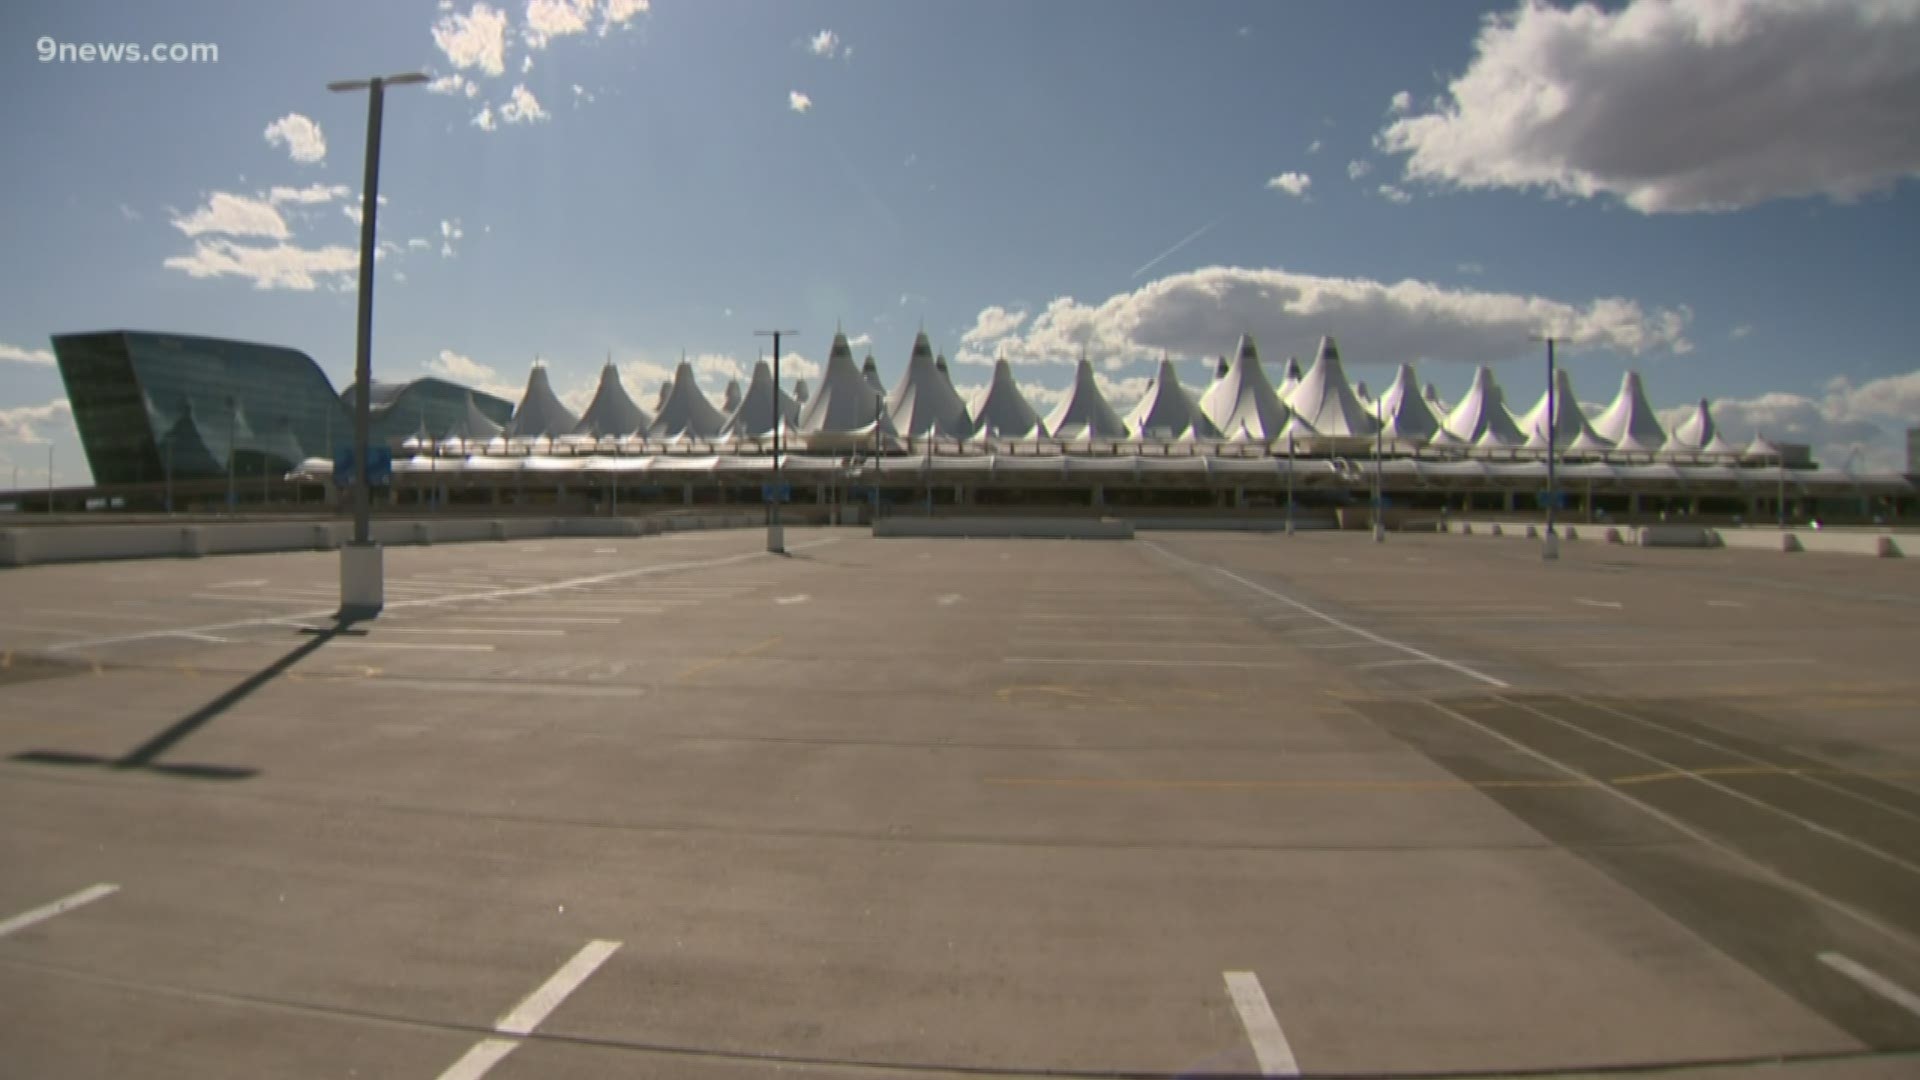 Airports across the country are seeing fewer passengers due to the novel coronavirus pandemic.